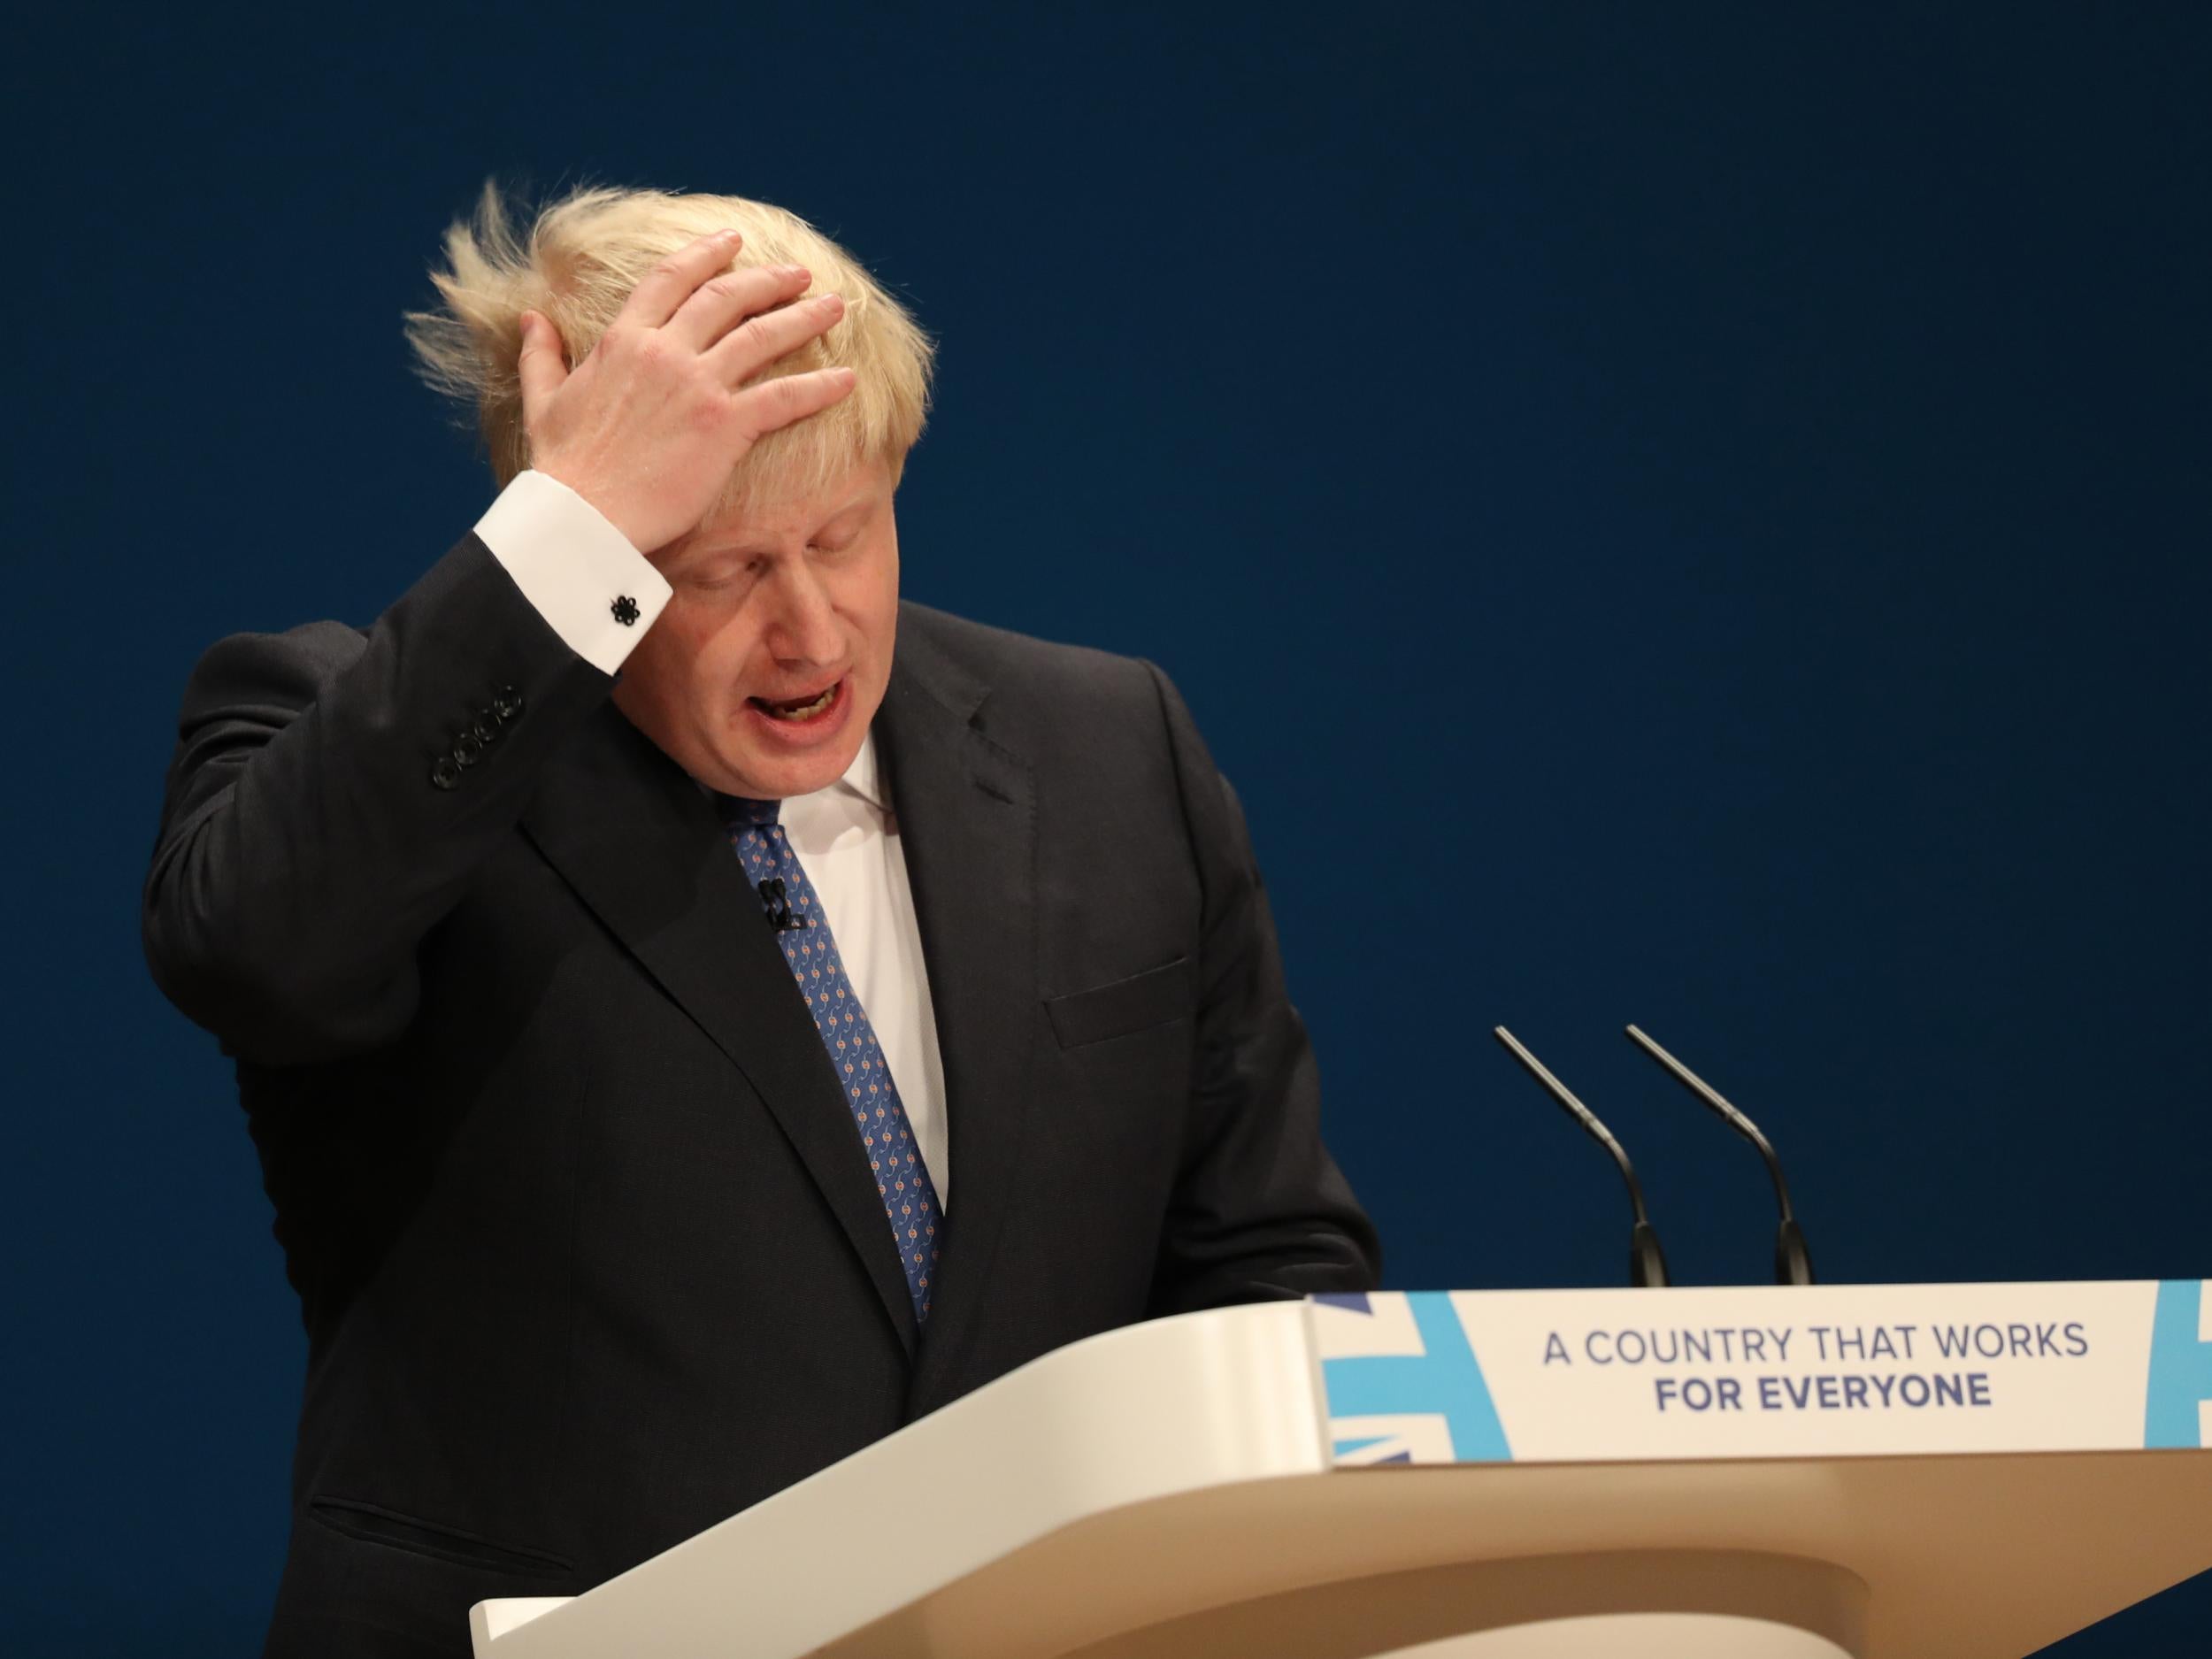 Boris Johnson was one of the Brexiteers who supported Brexit because he thought our Parliament should have its power back